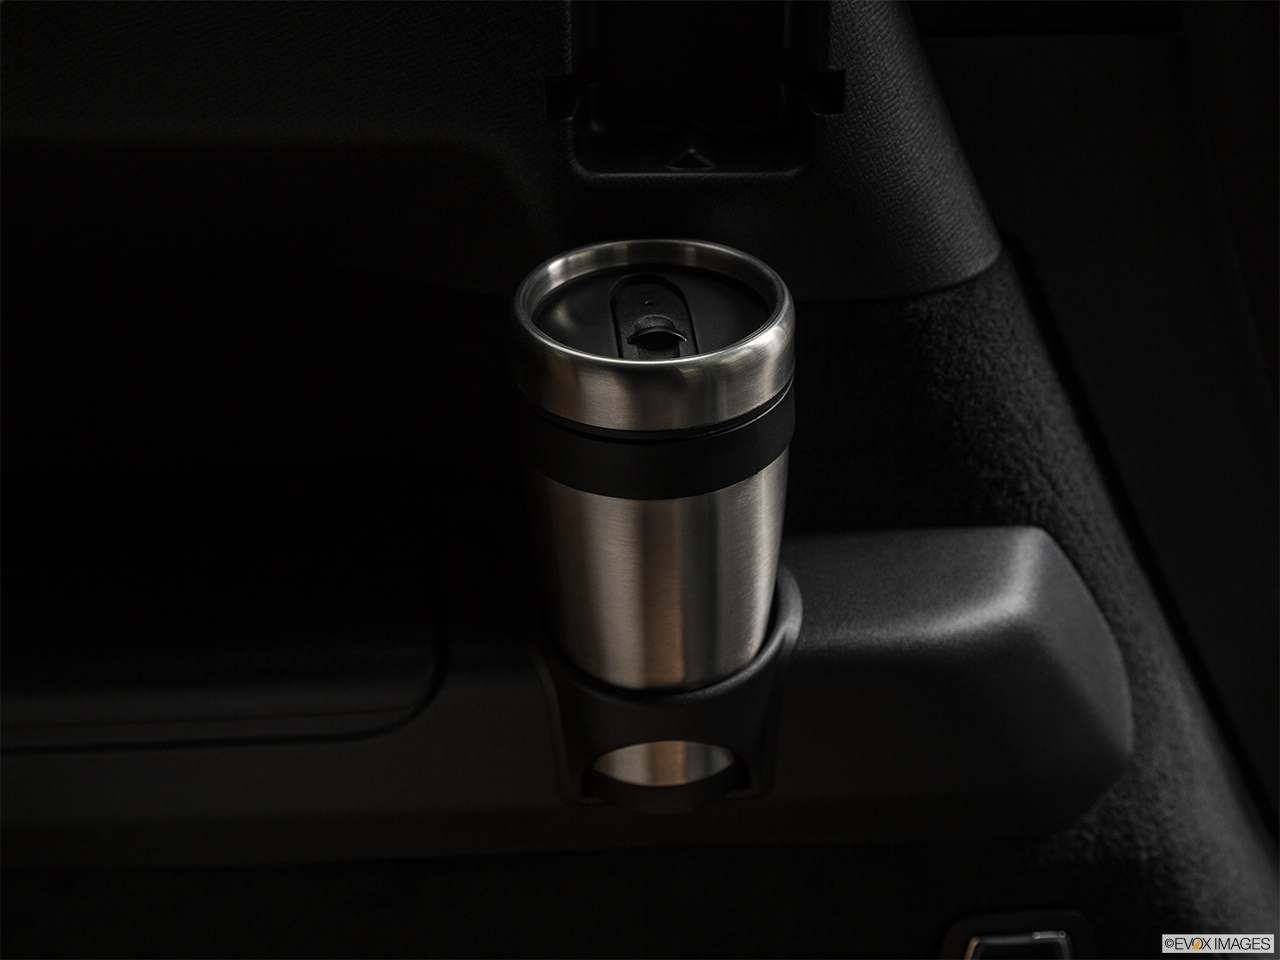 2019 Volvo XC90  T8 Inscription eAWD Plug-in Hybrid Third Row side cup holder with coffee prop. 